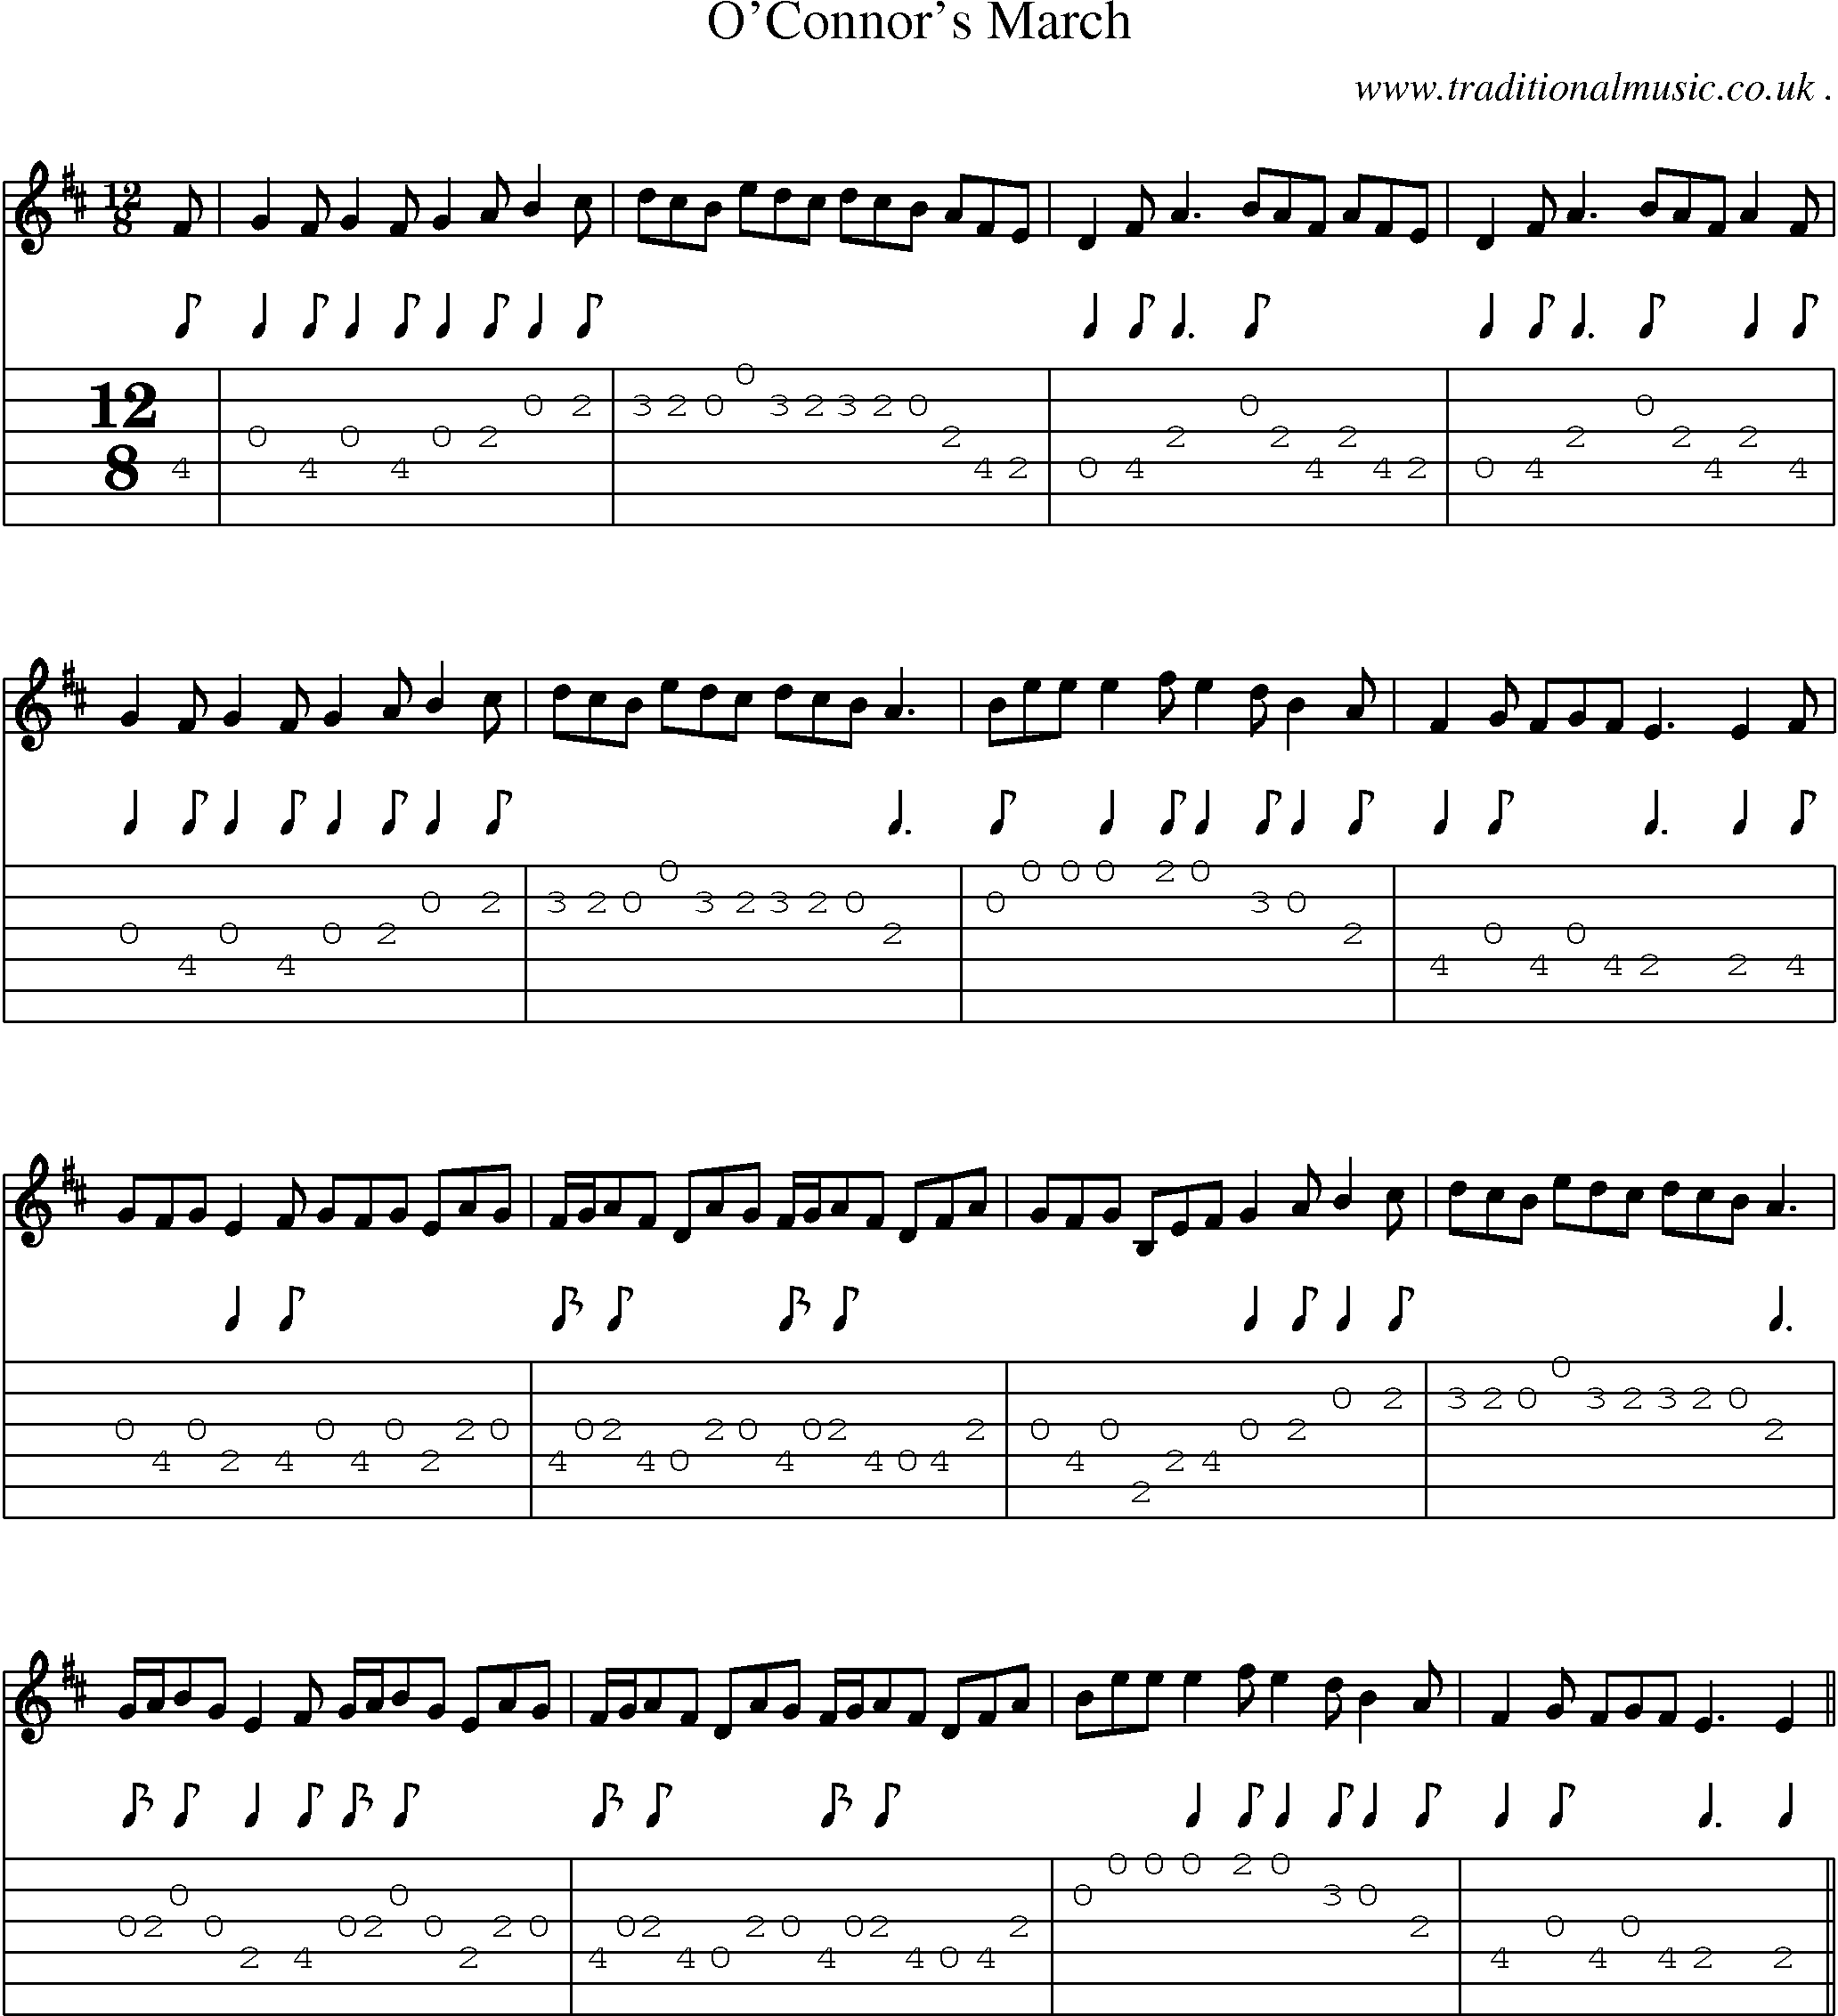 Sheet-Music and Guitar Tabs for Oconnors March